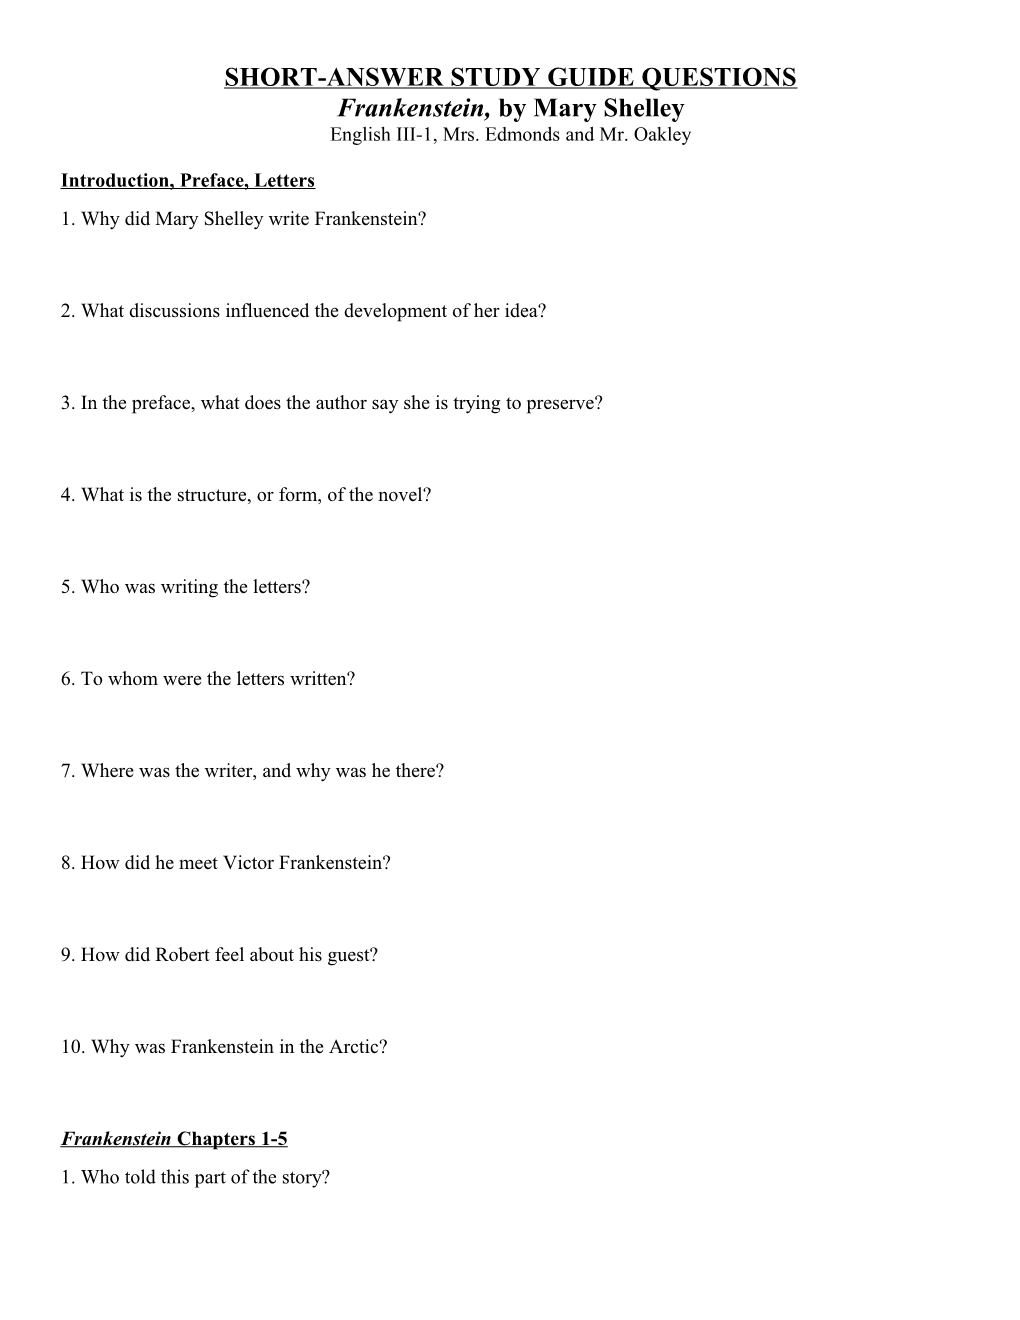 Short-Answer Study Guide Questions